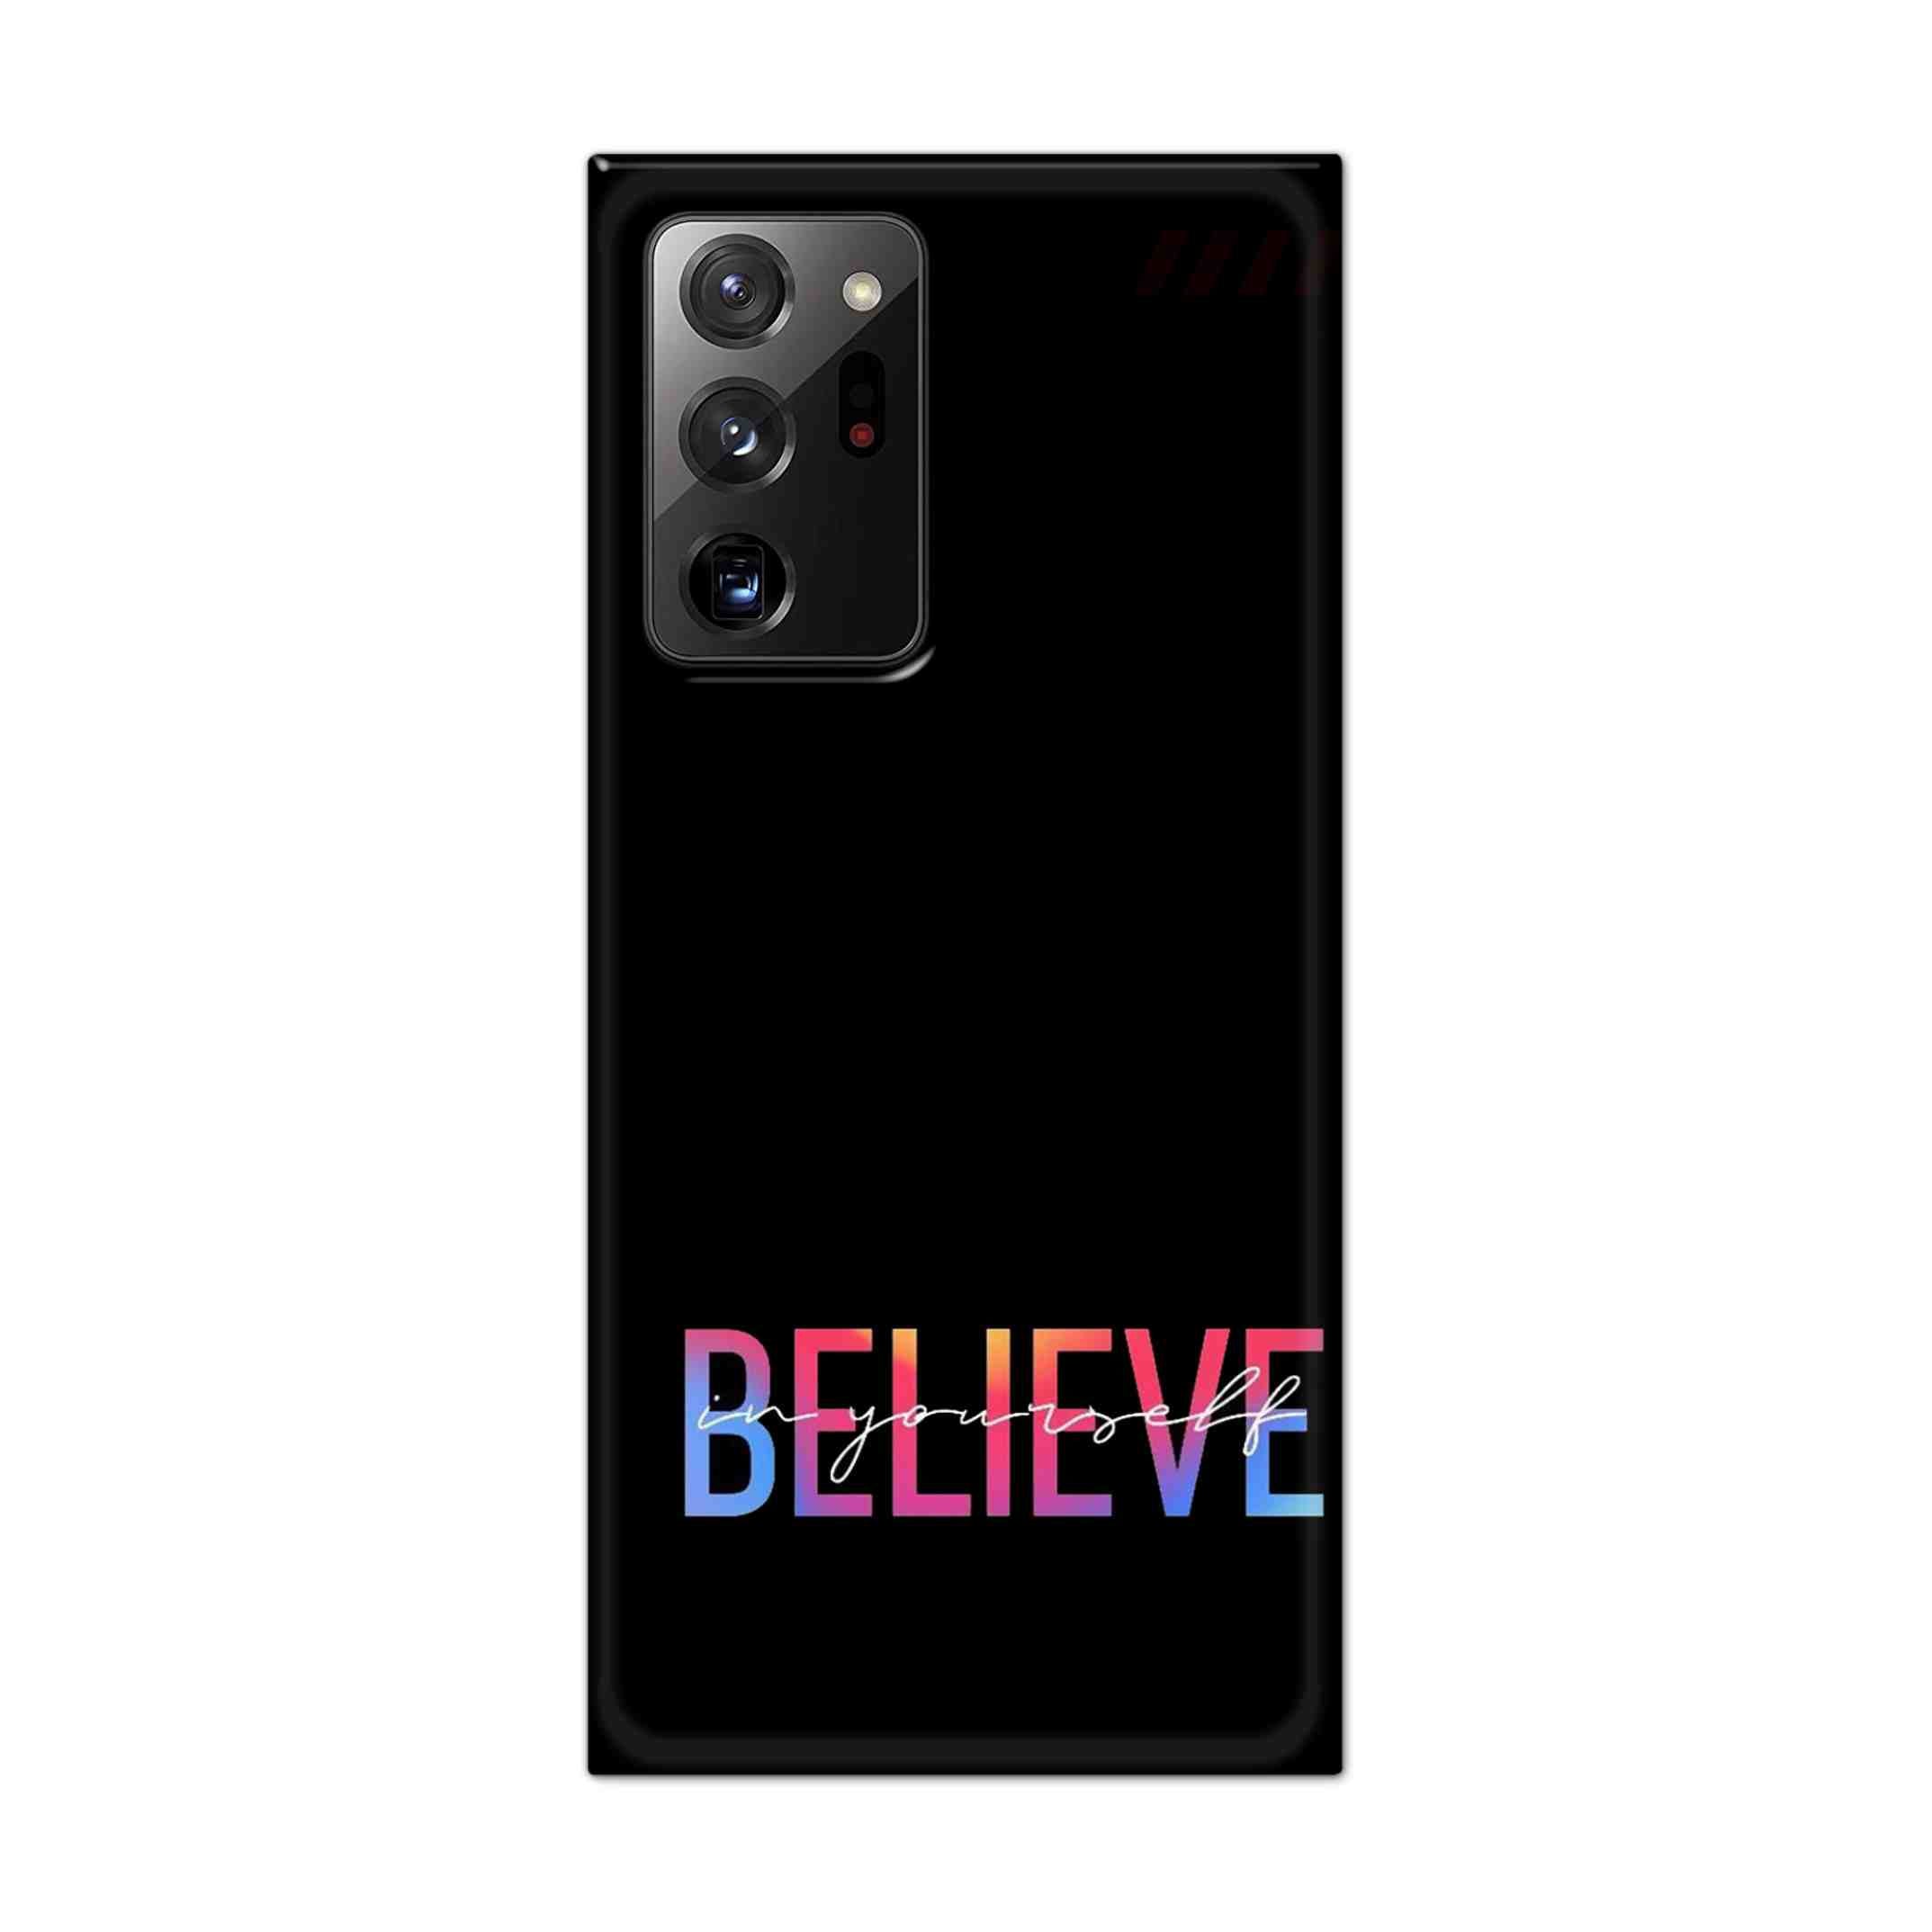 Buy Believe Hard Back Mobile Phone Case Cover For Samsung Galaxy Note 20 Ultra Online